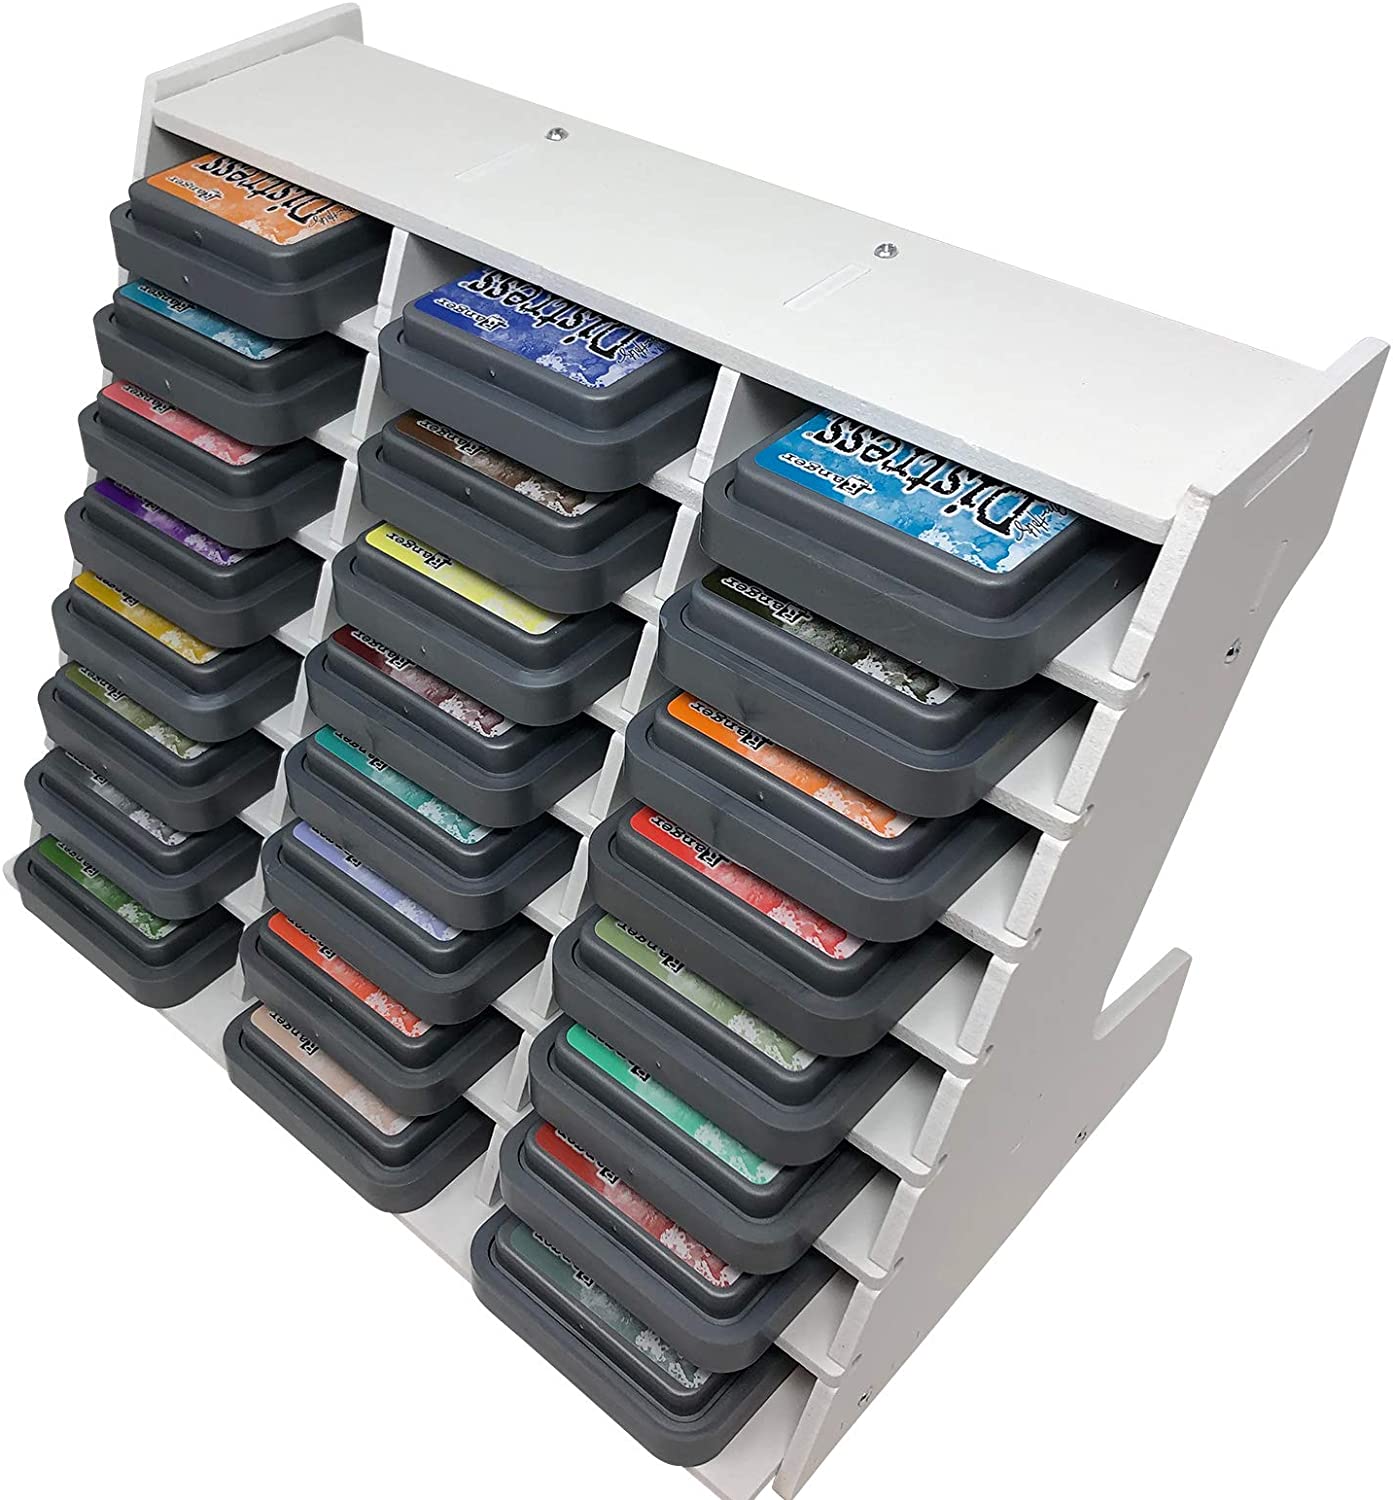 Pixiss 24 Ink Pad Storage Holder and Stamp Pad Storage for